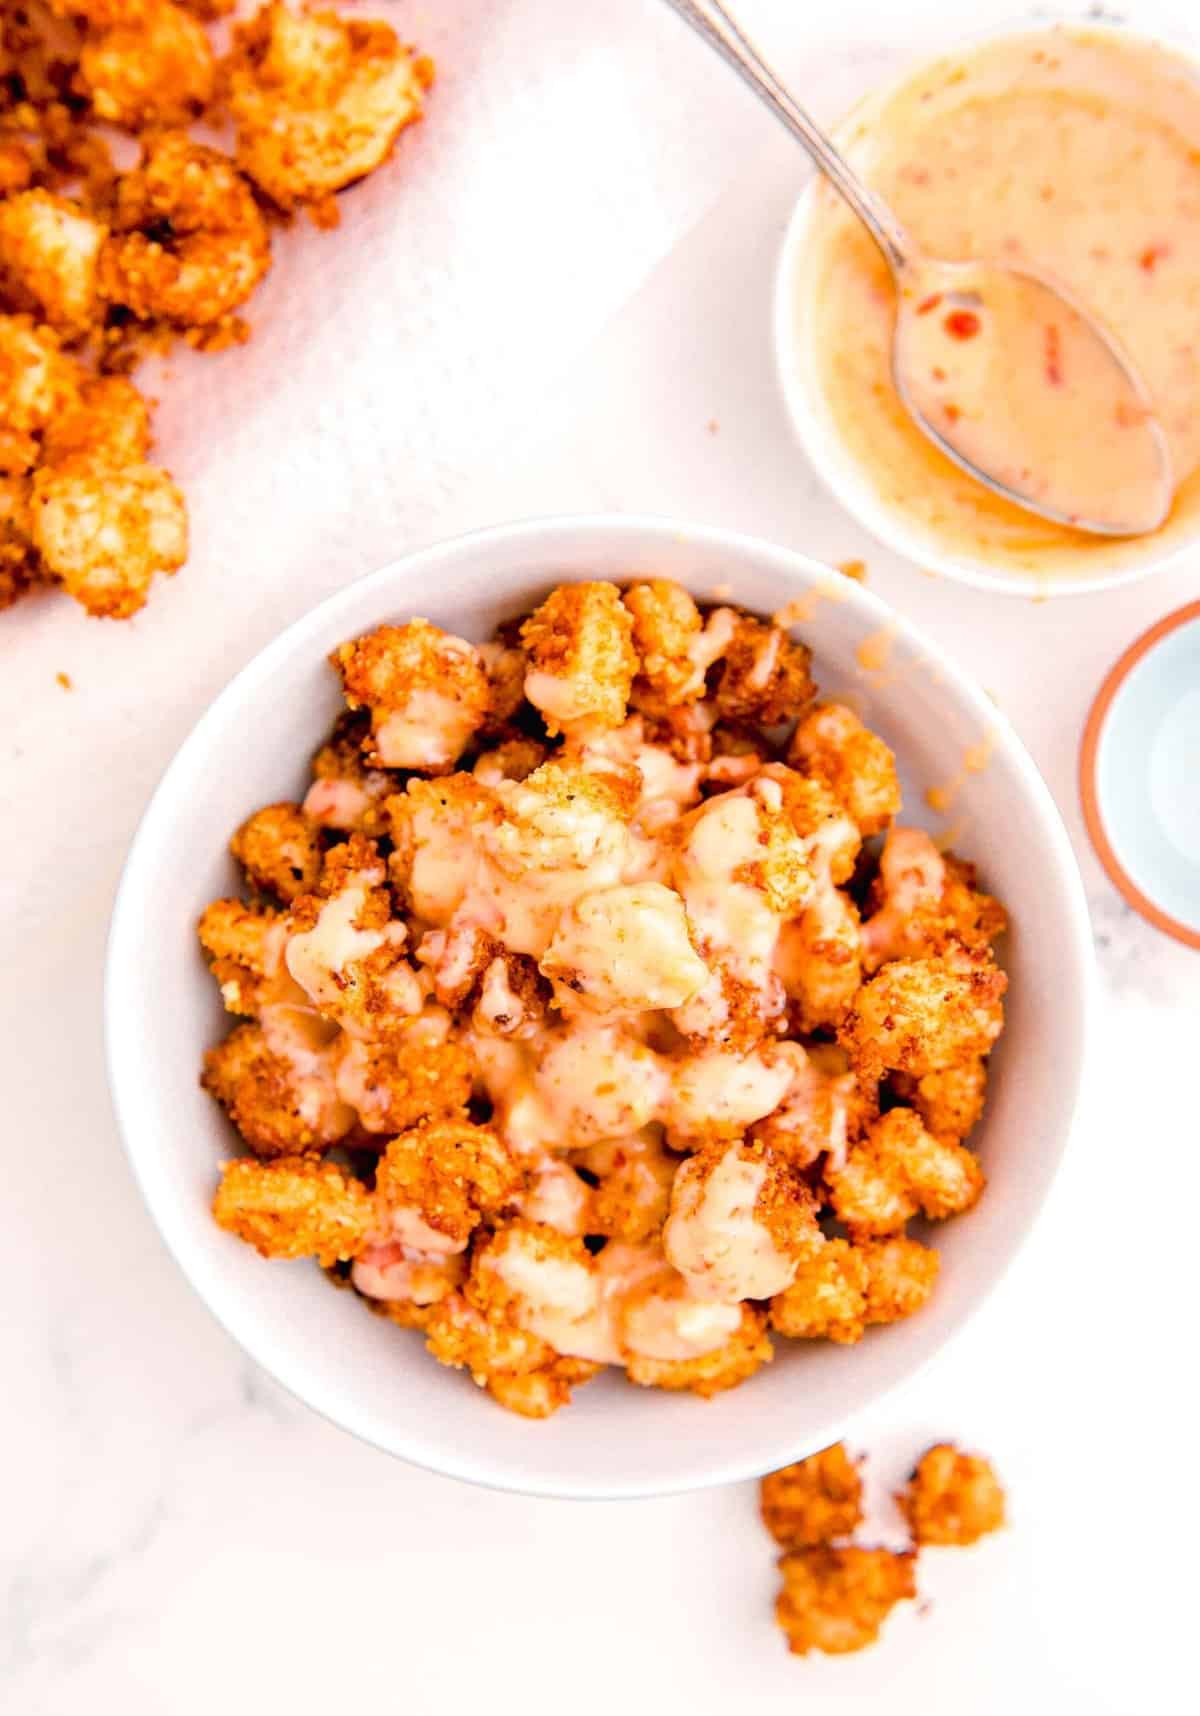 the mayo mixture is added on top of the bowl with the fried shrimp